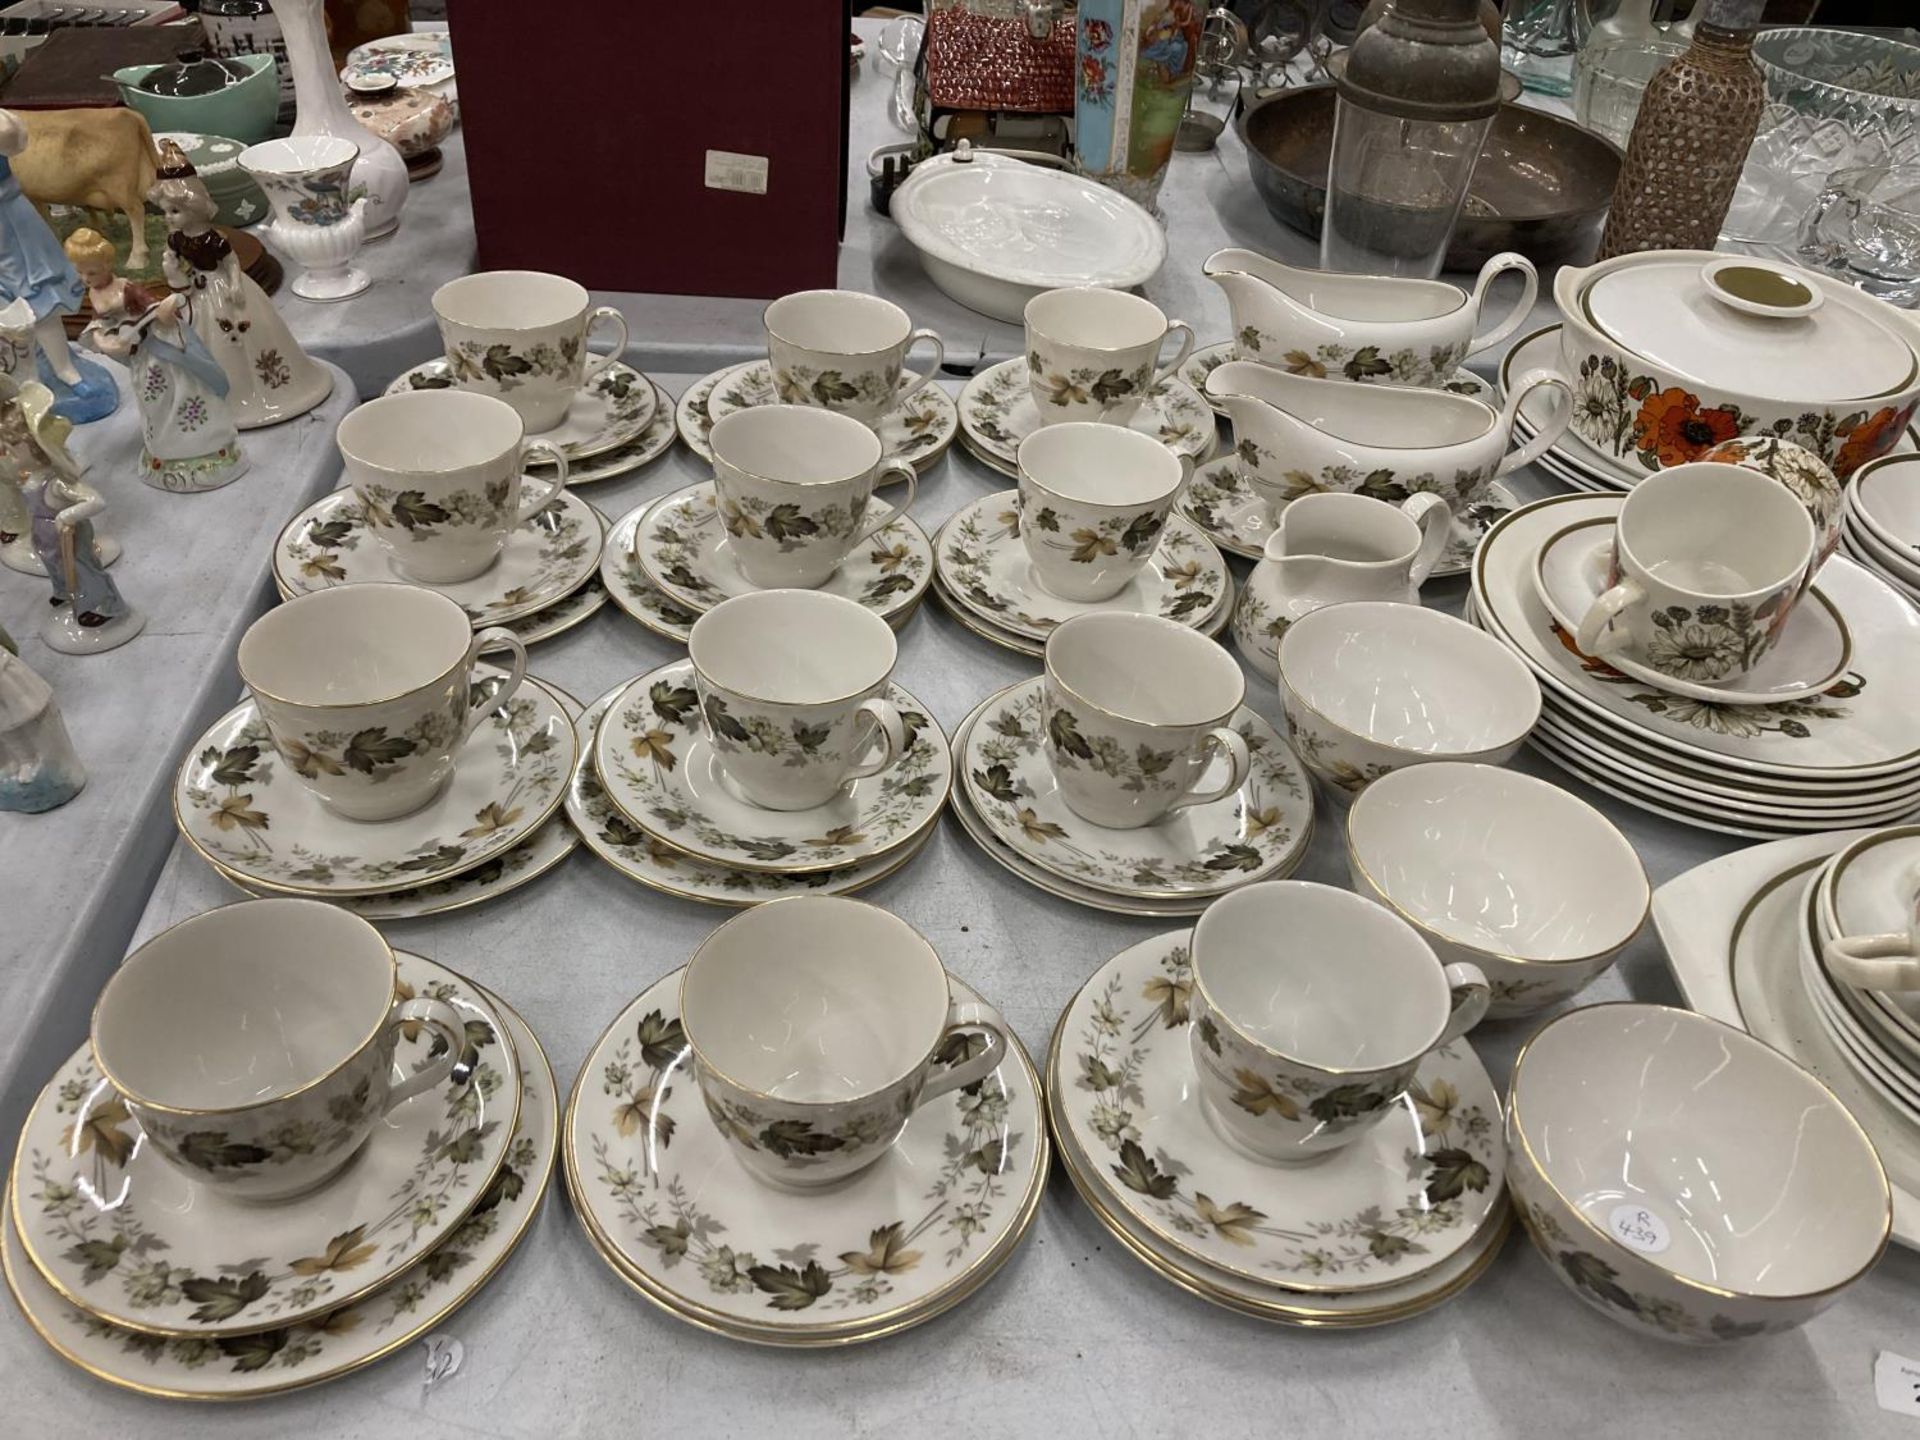 A LARGE QUANTITY OF ROYAL DOULTON 'LARCHMONT' TRIOS PLUS SAUCE BOATS AND SAUCERS, A CREAM JUG AND